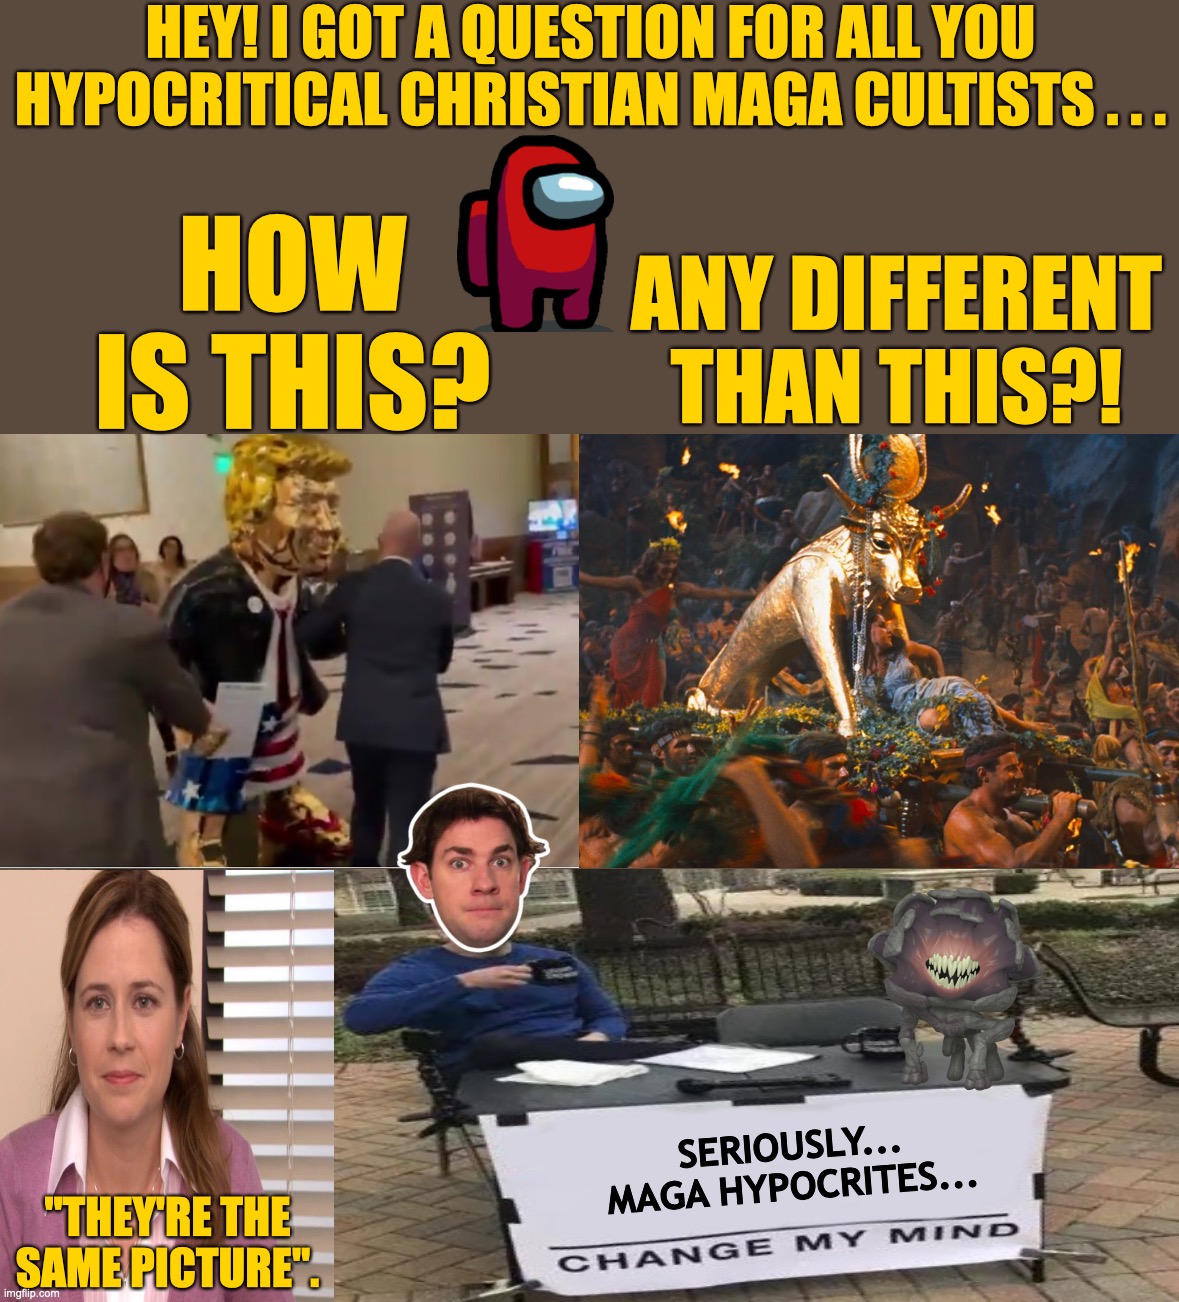 Trump Statue vs. Golden Calf | HEY! I GOT A QUESTION FOR ALL YOU HYPOCRITICAL CHRISTIAN MAGA CULTISTS . . . HOW
IS THIS? ANY DIFFERENT
THAN THIS?! SERIOUSLY...
MAGA HYPOCRITES... "THEY'RE THE
SAME PICTURE". | image tagged in trump gold statue,jim halpert,pam beesly,a quiet place john krasinski,golden calf ten commandments | made w/ Imgflip meme maker